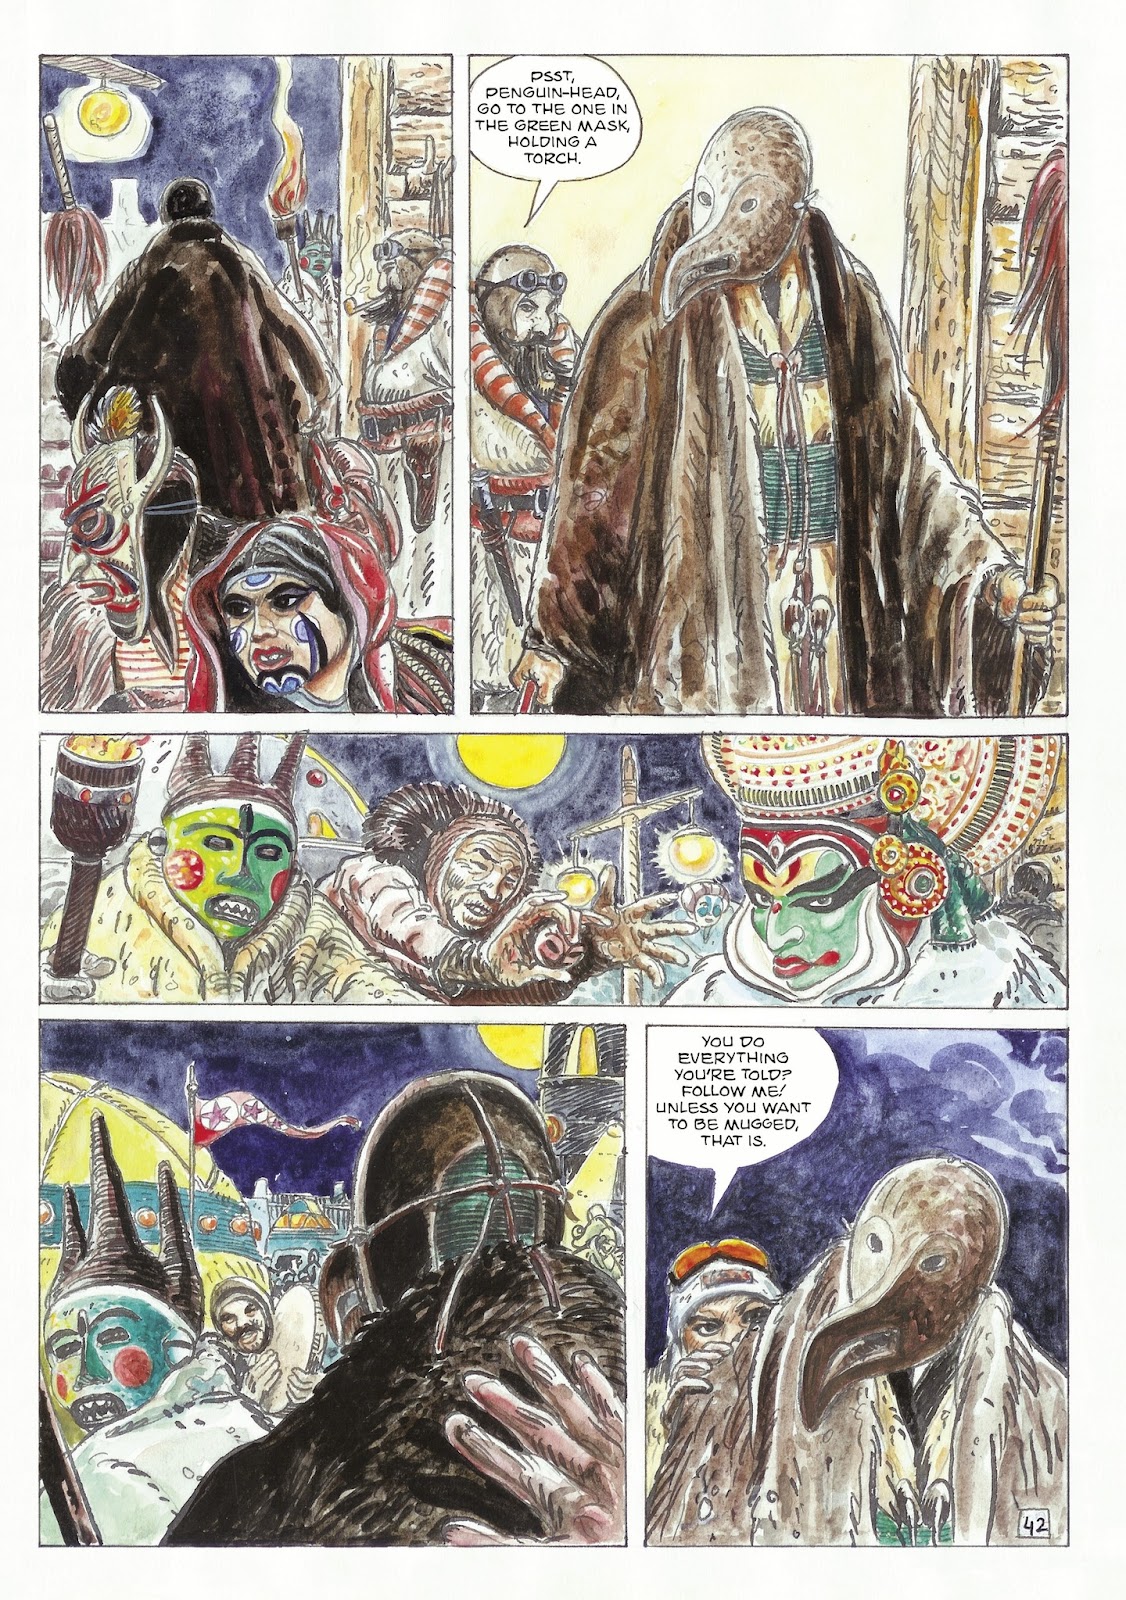 The Man With the Bear issue 1 - Page 44